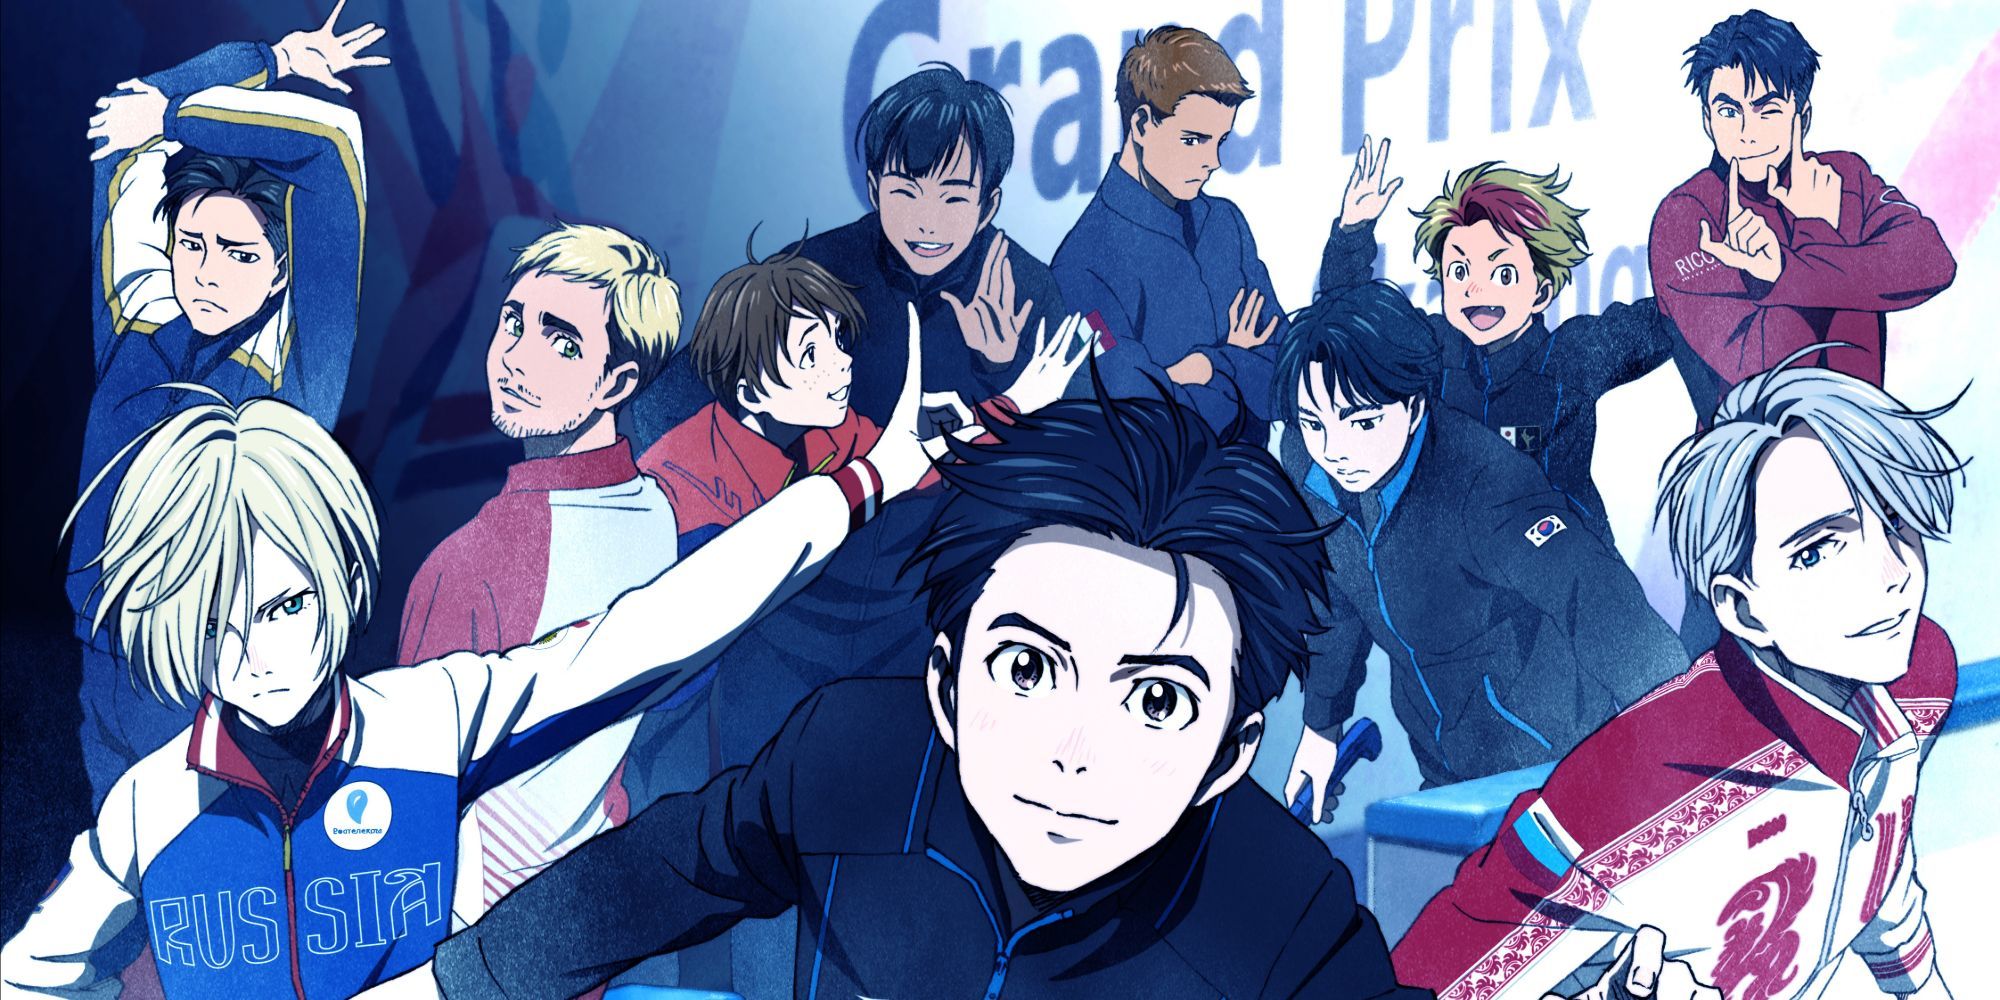 The main characters from Yuri!!! on Ice posing at the rink